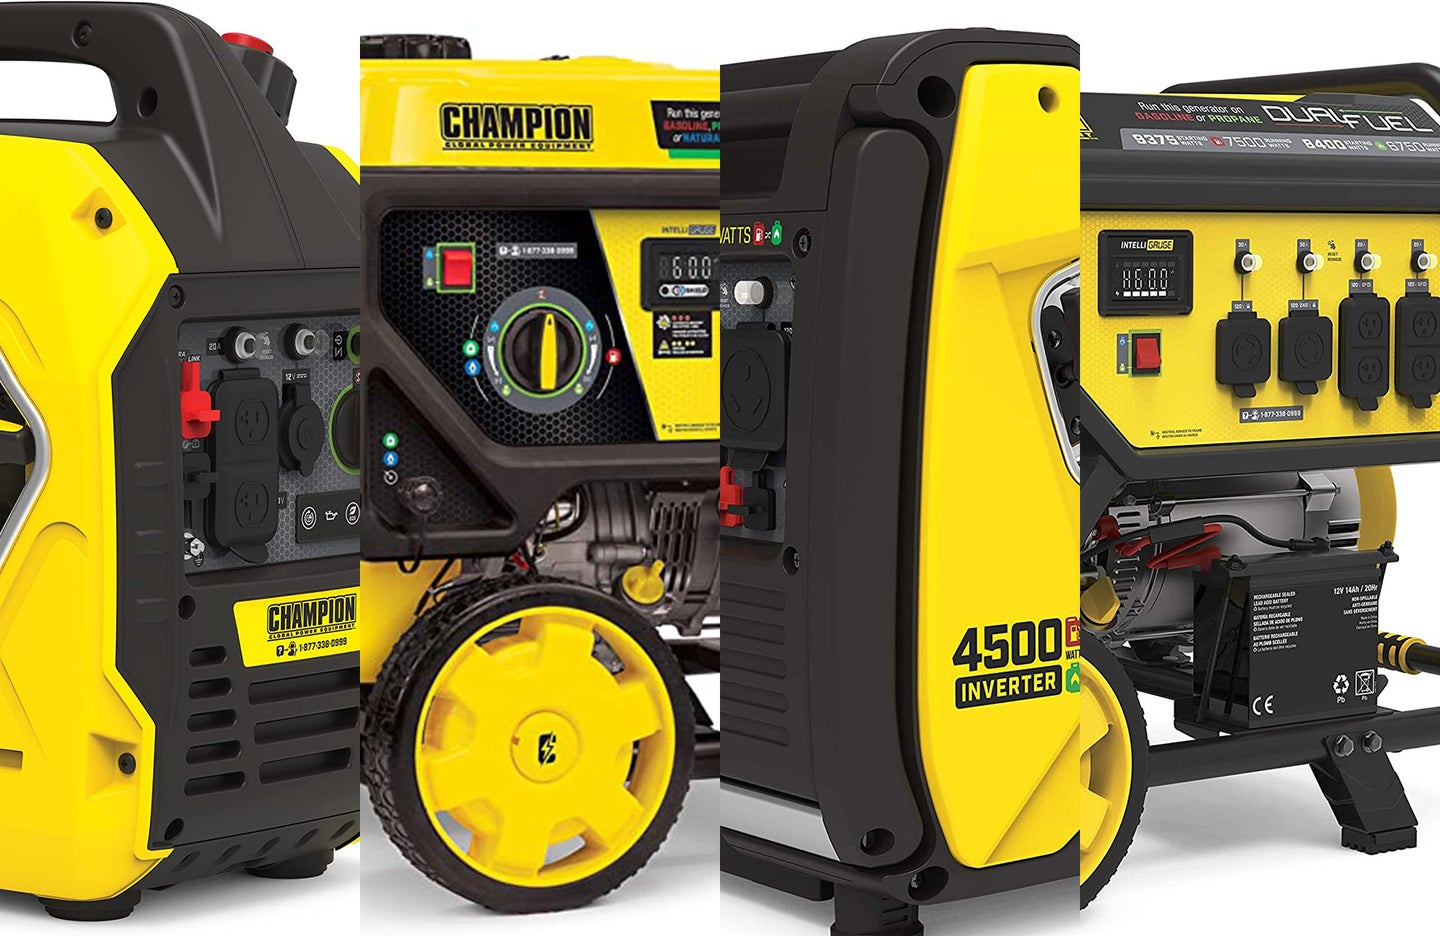 A lineup of champion power equipment on sale